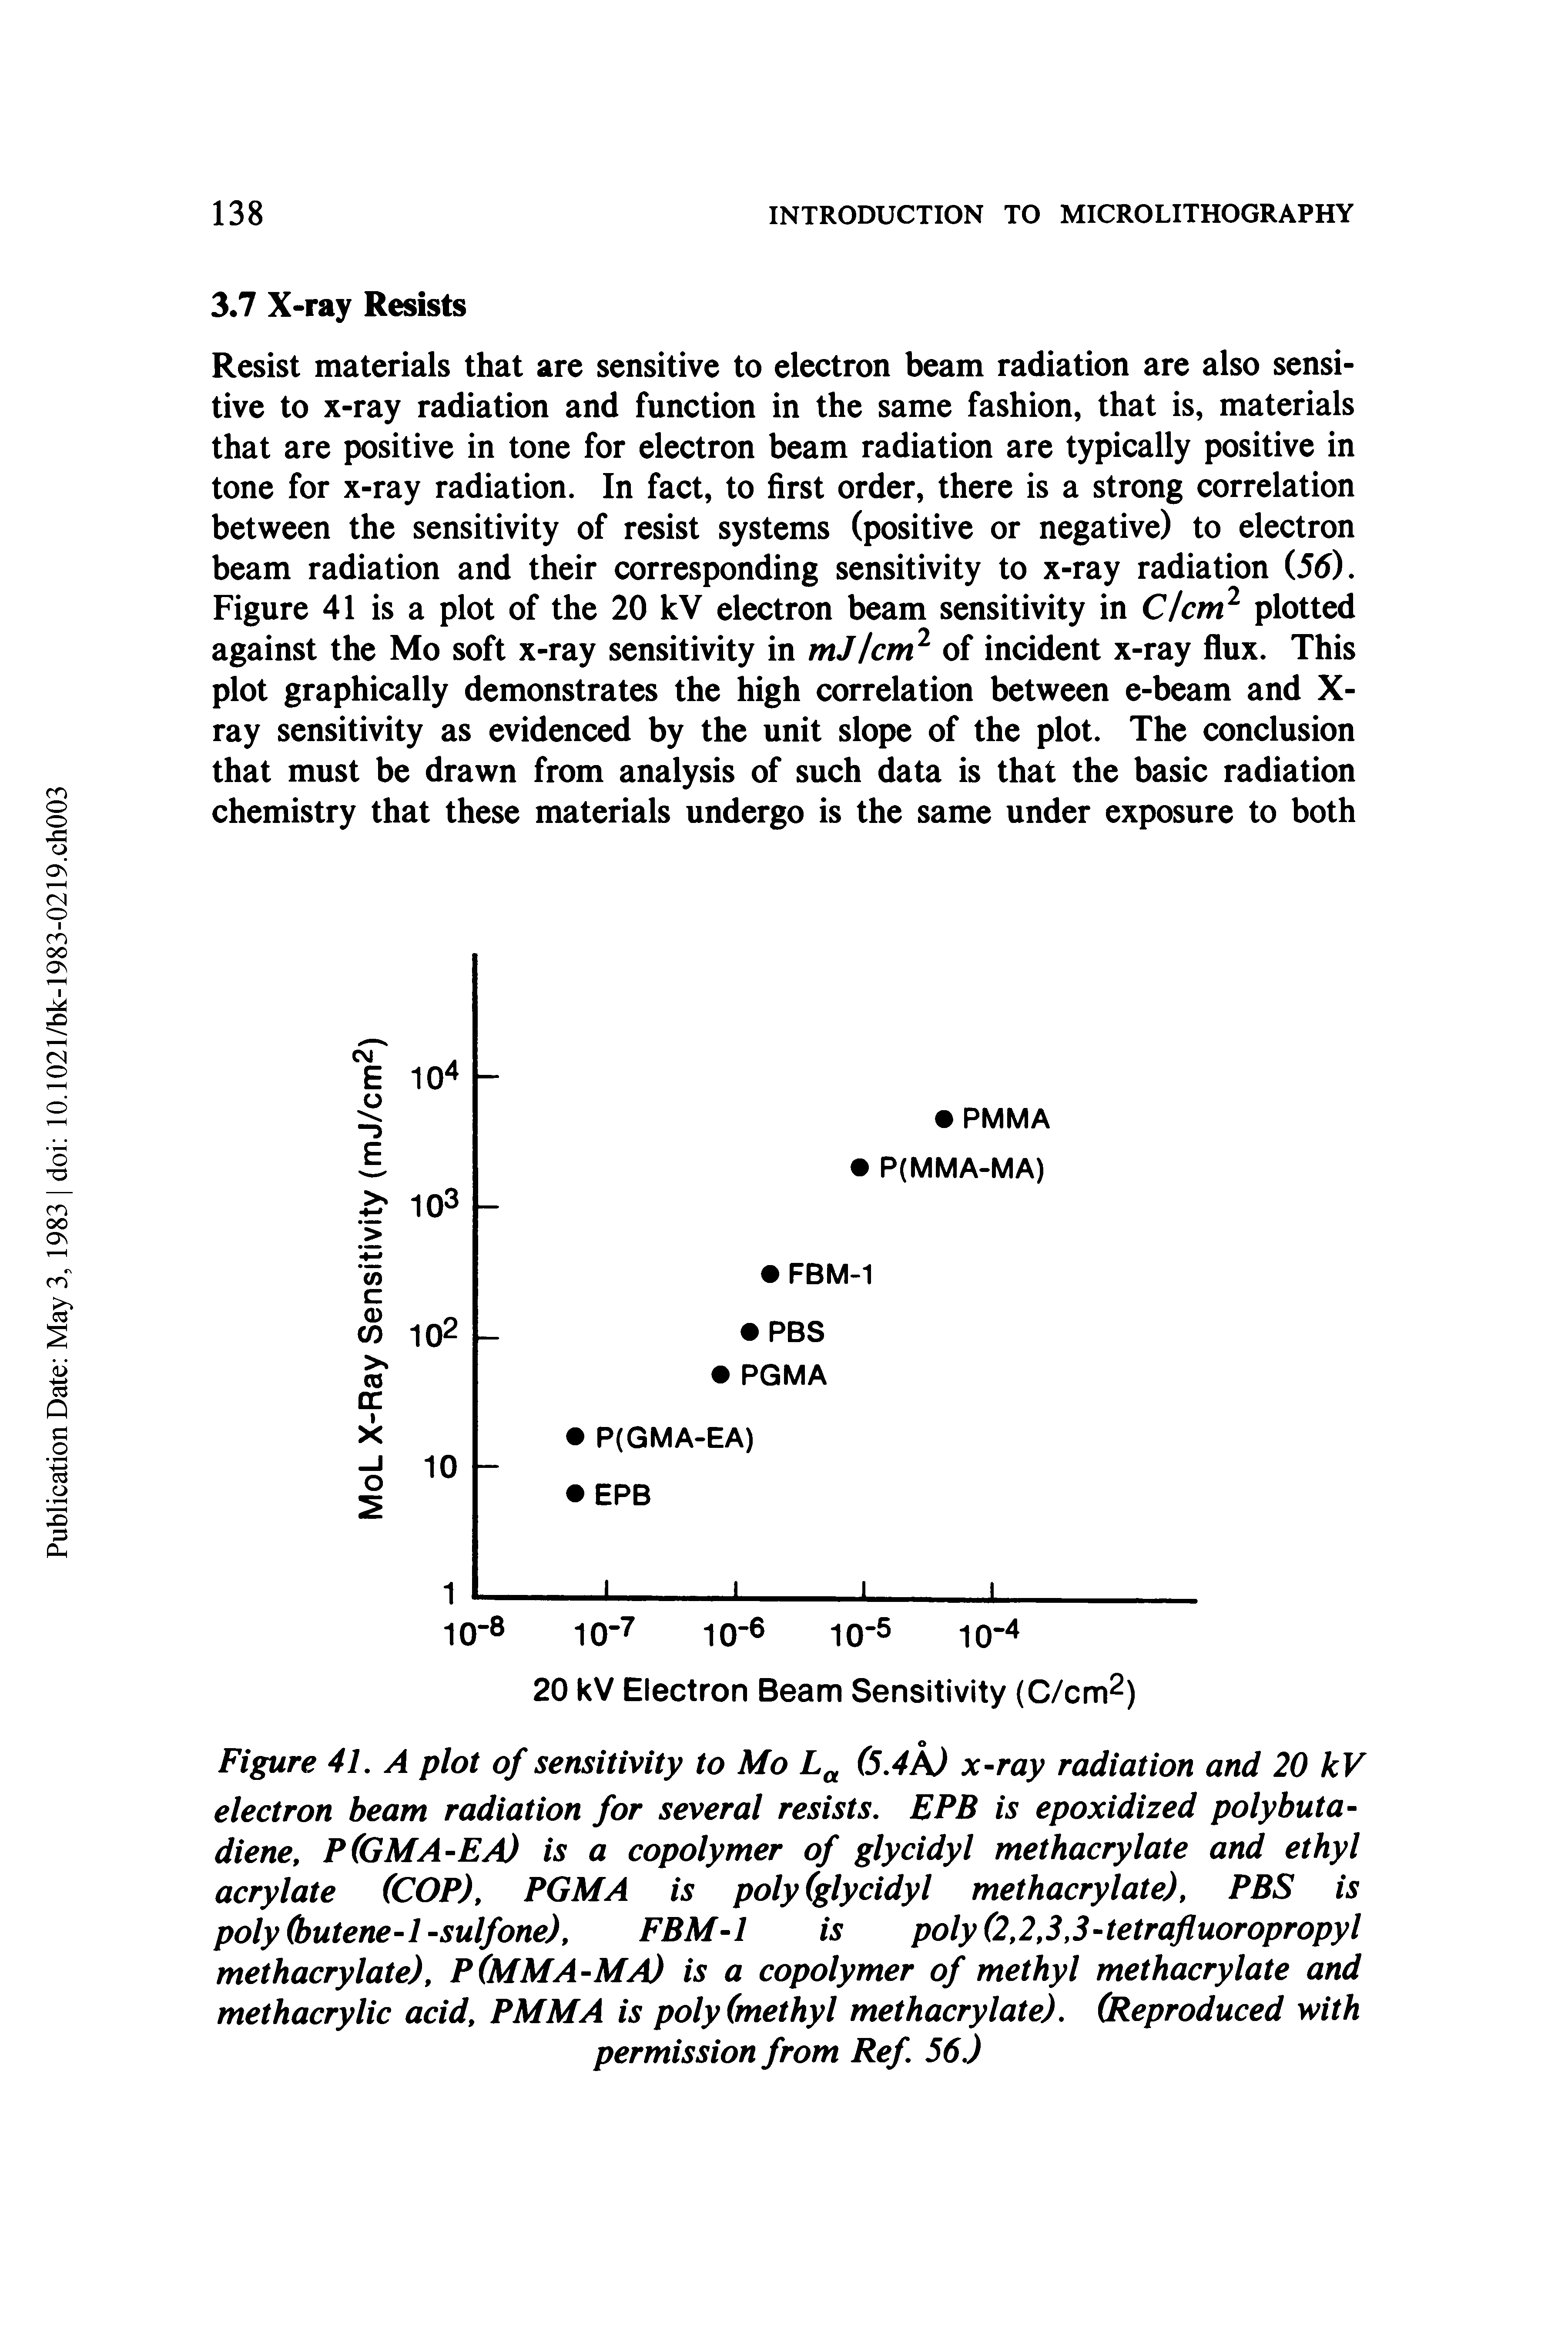 Figure 41. A plot of sensitivity to Mo (5.4k) x-ray radiation and 20 kV electron beam radiation for several resists. EPB is epoxidized polybutadiene, P(GMA-EA) is a copolymer of glycidyl methacrylate and ethyl acrylate (COP), PGMA is poly (glycidyl methacrylate), PBS is poly (butene-1 -sulfone), FBM-1 is poly (2,2,3,3-tetrafluoropropyl methacrylate), P(MMA-MA) is a copolymer of methyl methacrylate and methacrylic acid, PMMA is poly (methyl methacrylate). (Reproduced with permission from Ref. 56J...